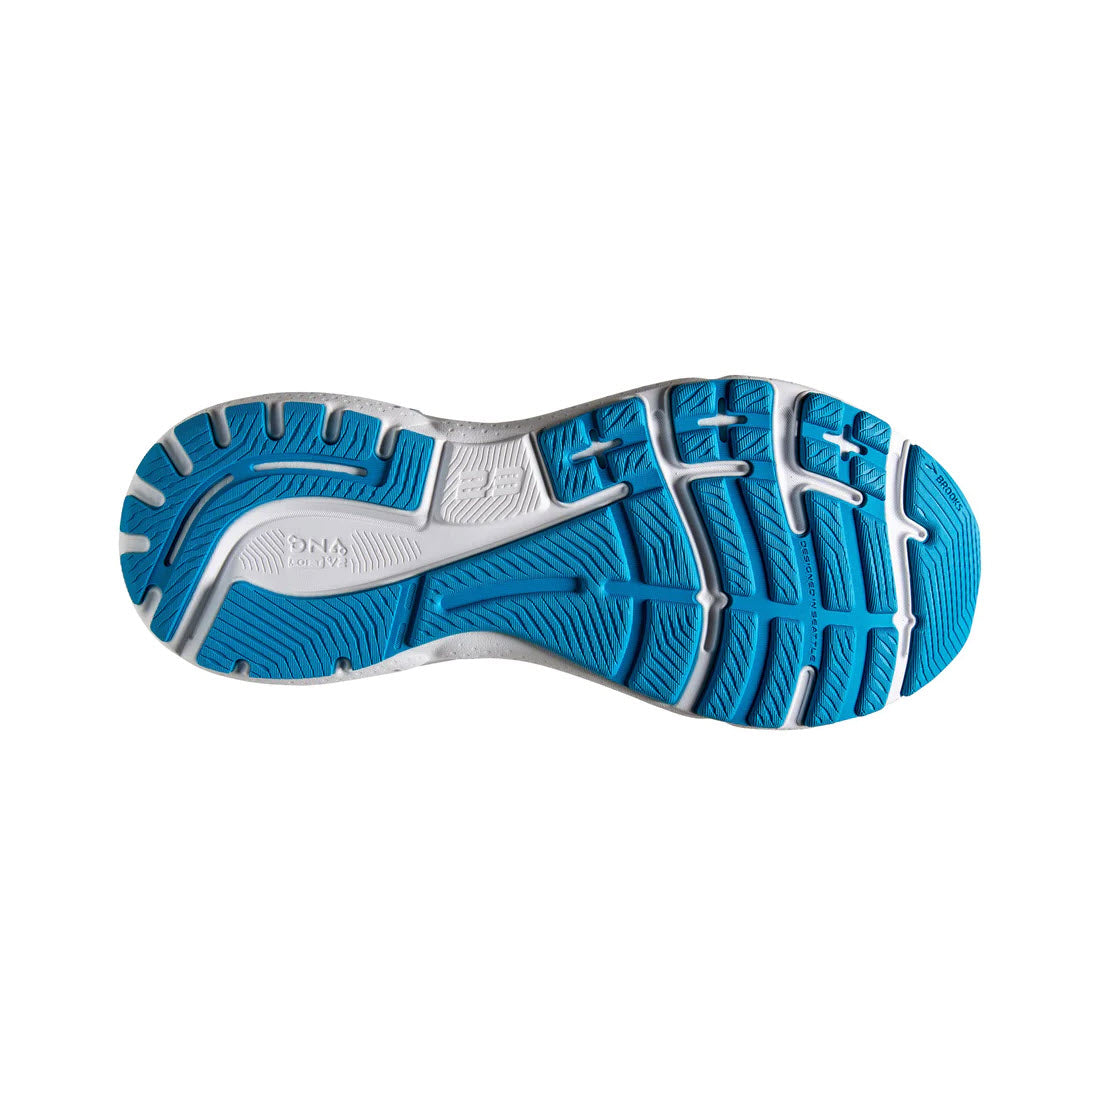 Sole of a Brooks Adrenaline GTS 23 Black/Hawaiian Ocean/Green - Mens stability running shoe with blue and white tread pattern, showcasing intricate grip design and brand embossing.